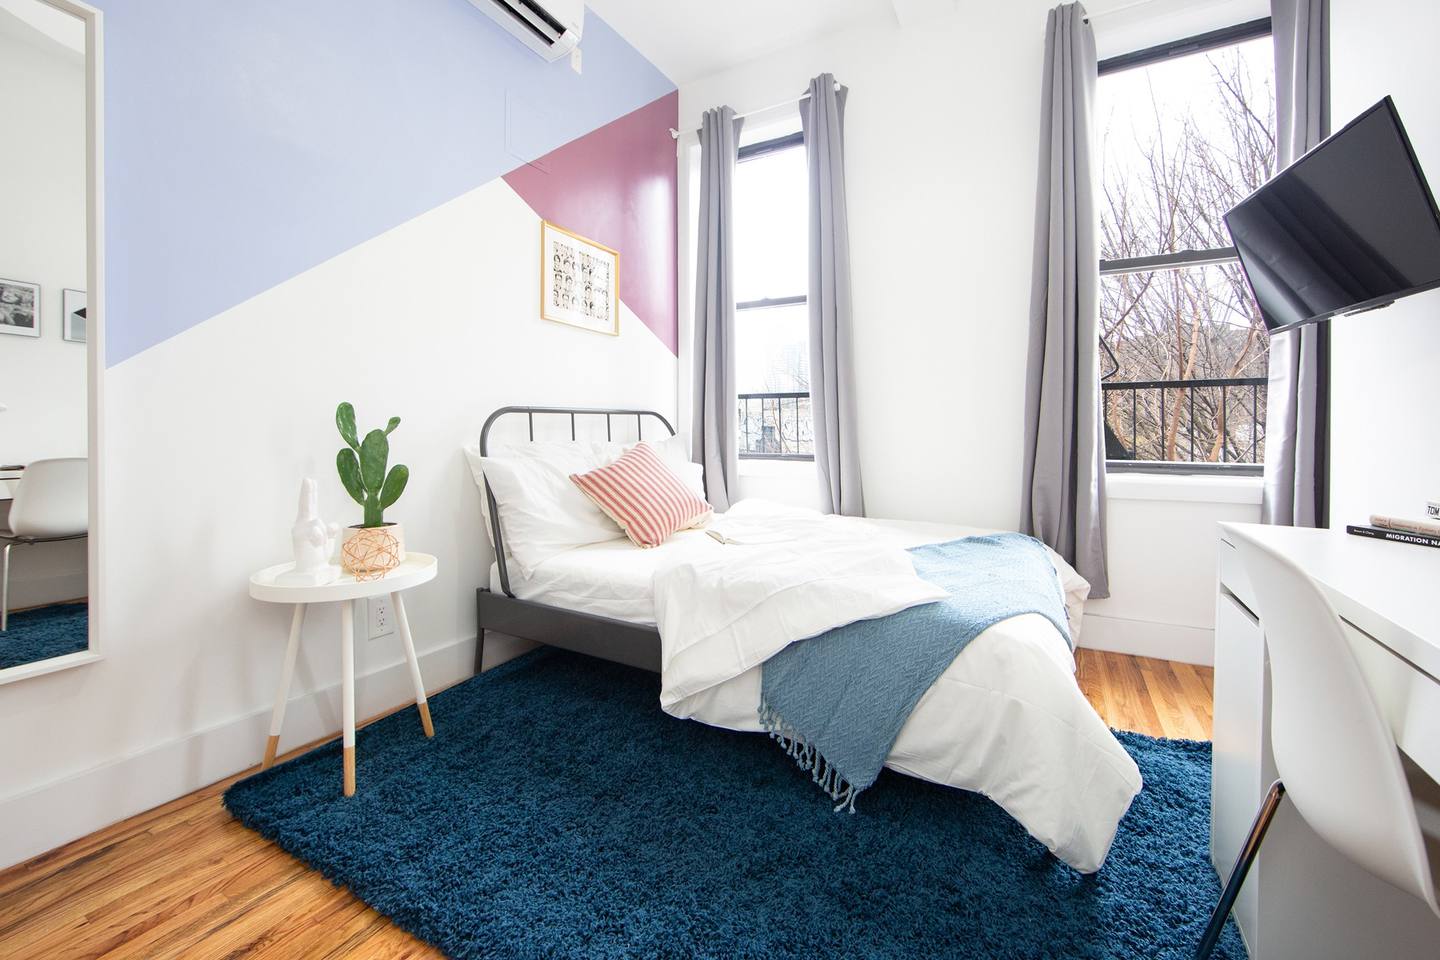 Good deals on rentals in Fort Greene, NYC